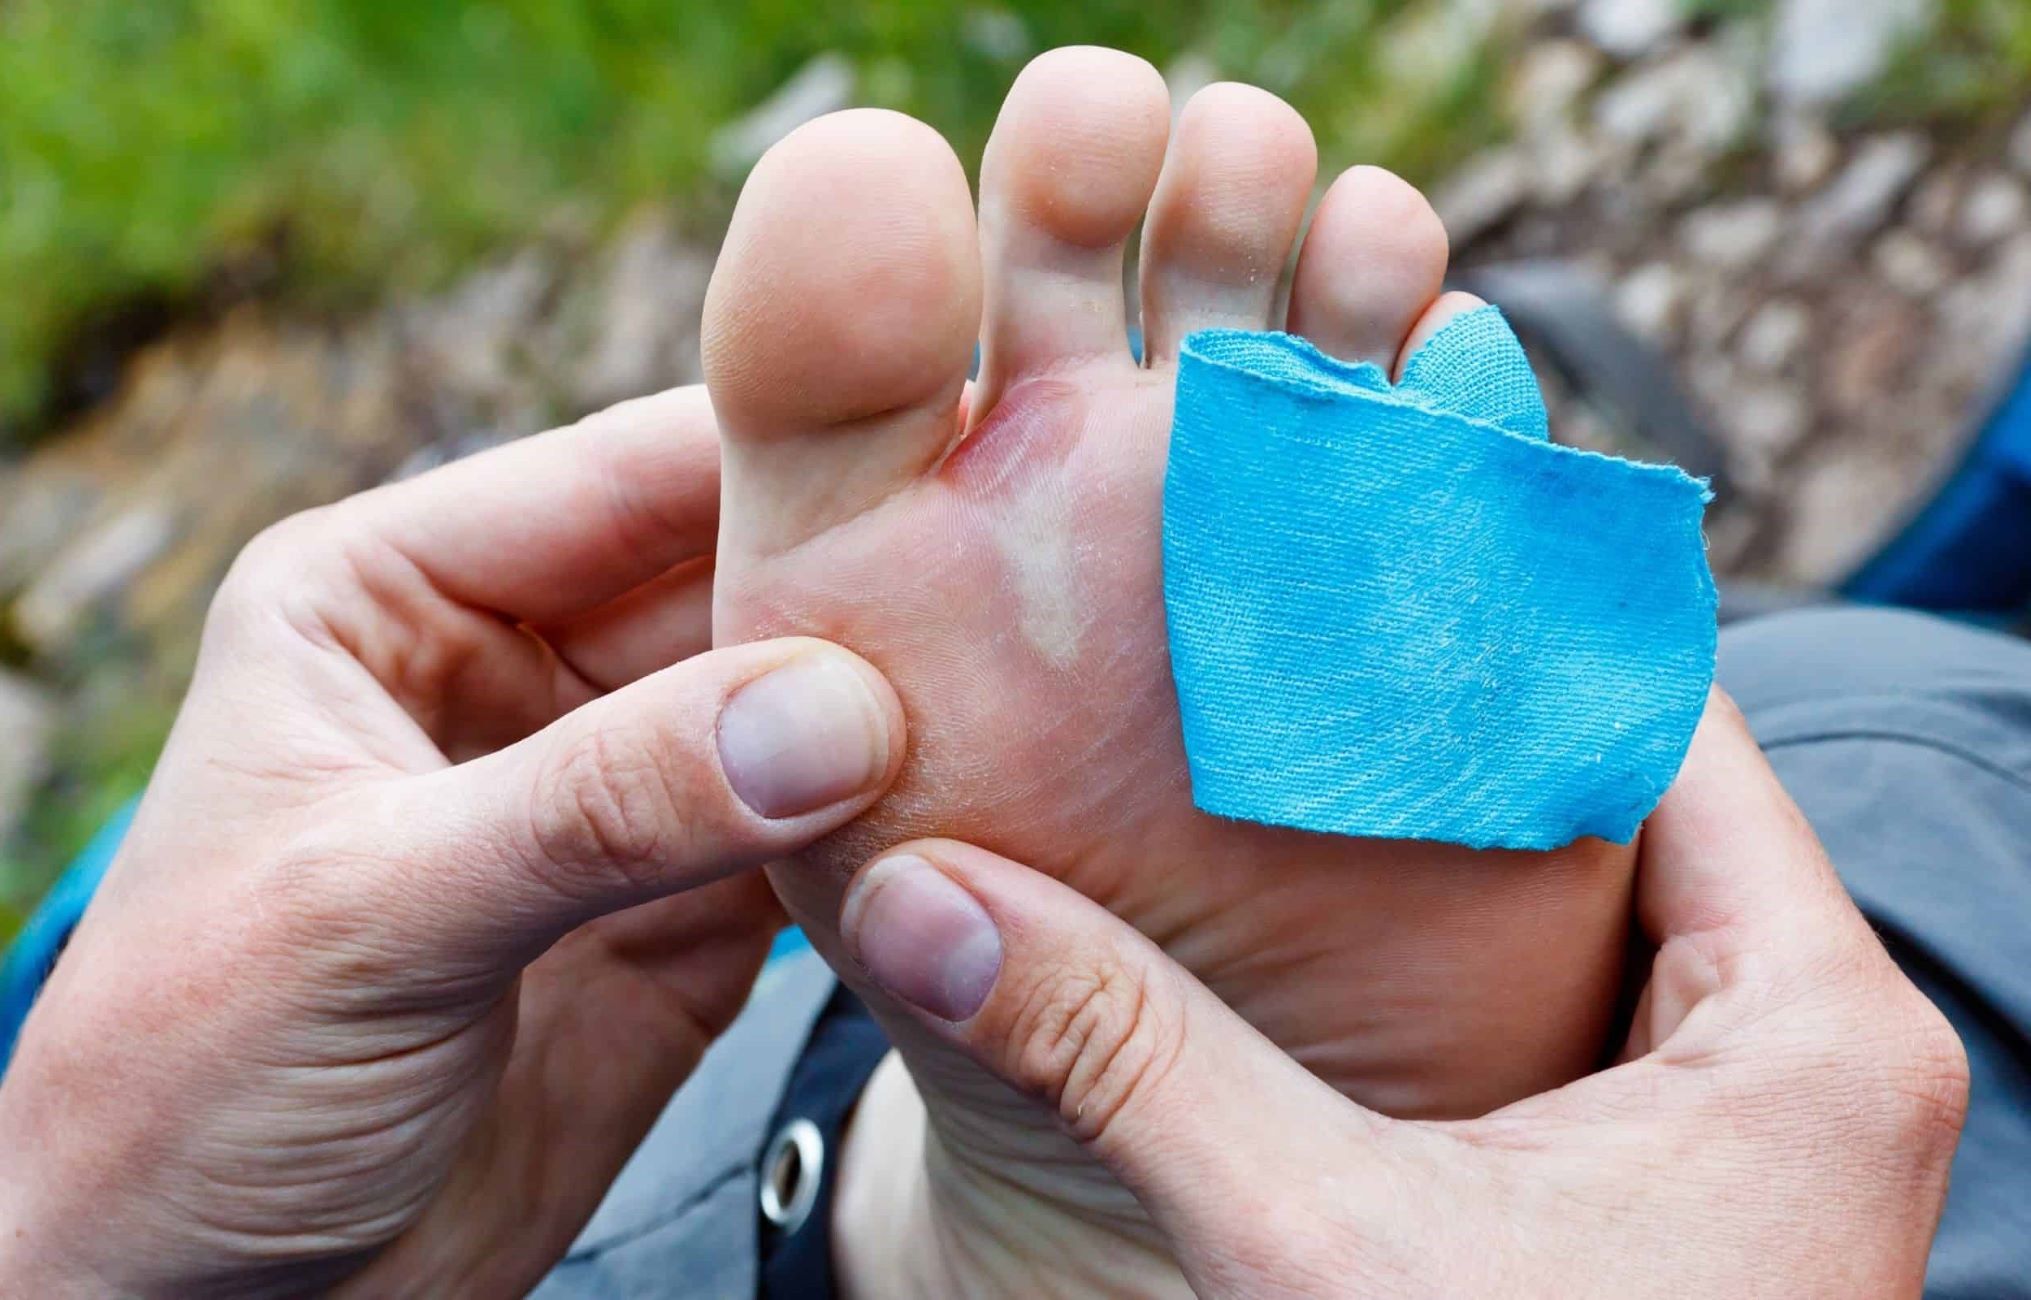 Preventing And Treating Blisters: A Guide For Runners